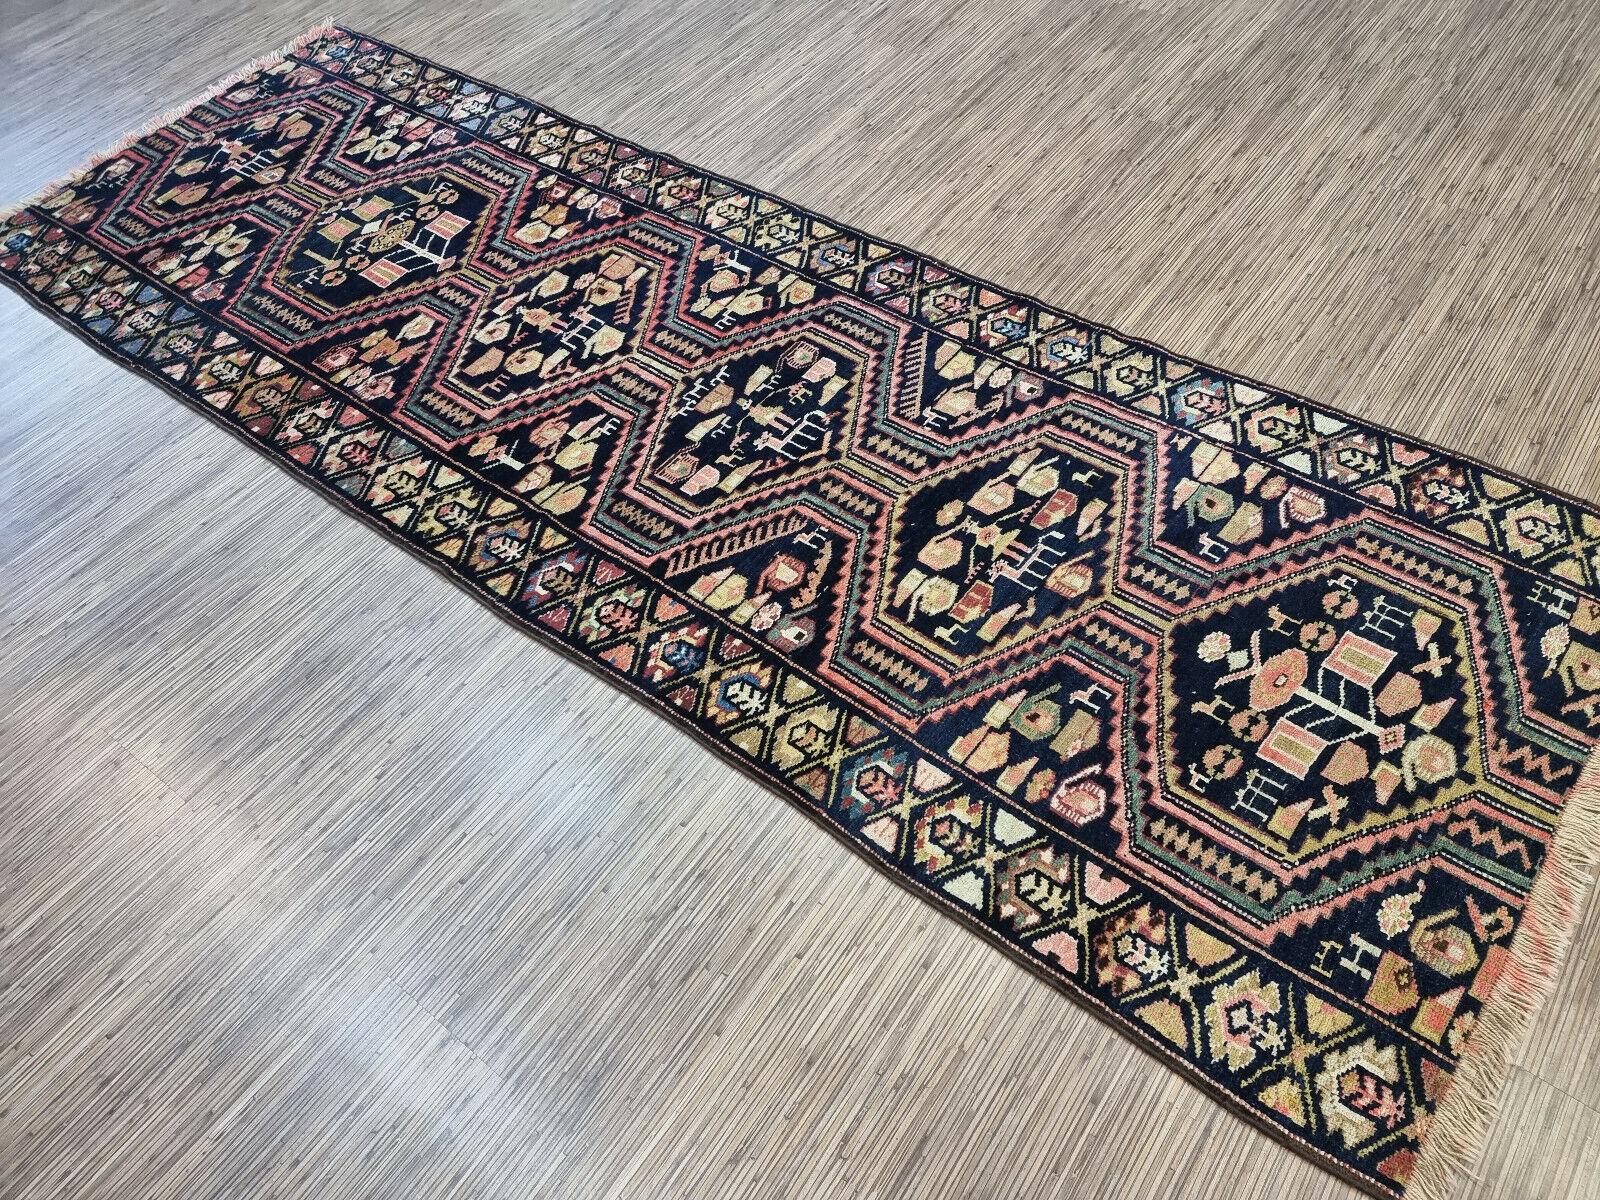 Add a touch of vintage charm to your hallway or living room with our Handmade Antique Persian Style Luri Runner Rug. This stunning piece was woven in the 1920s, showcasing the exquisite craftsmanship and artistry of the Luri tribe from southwestern